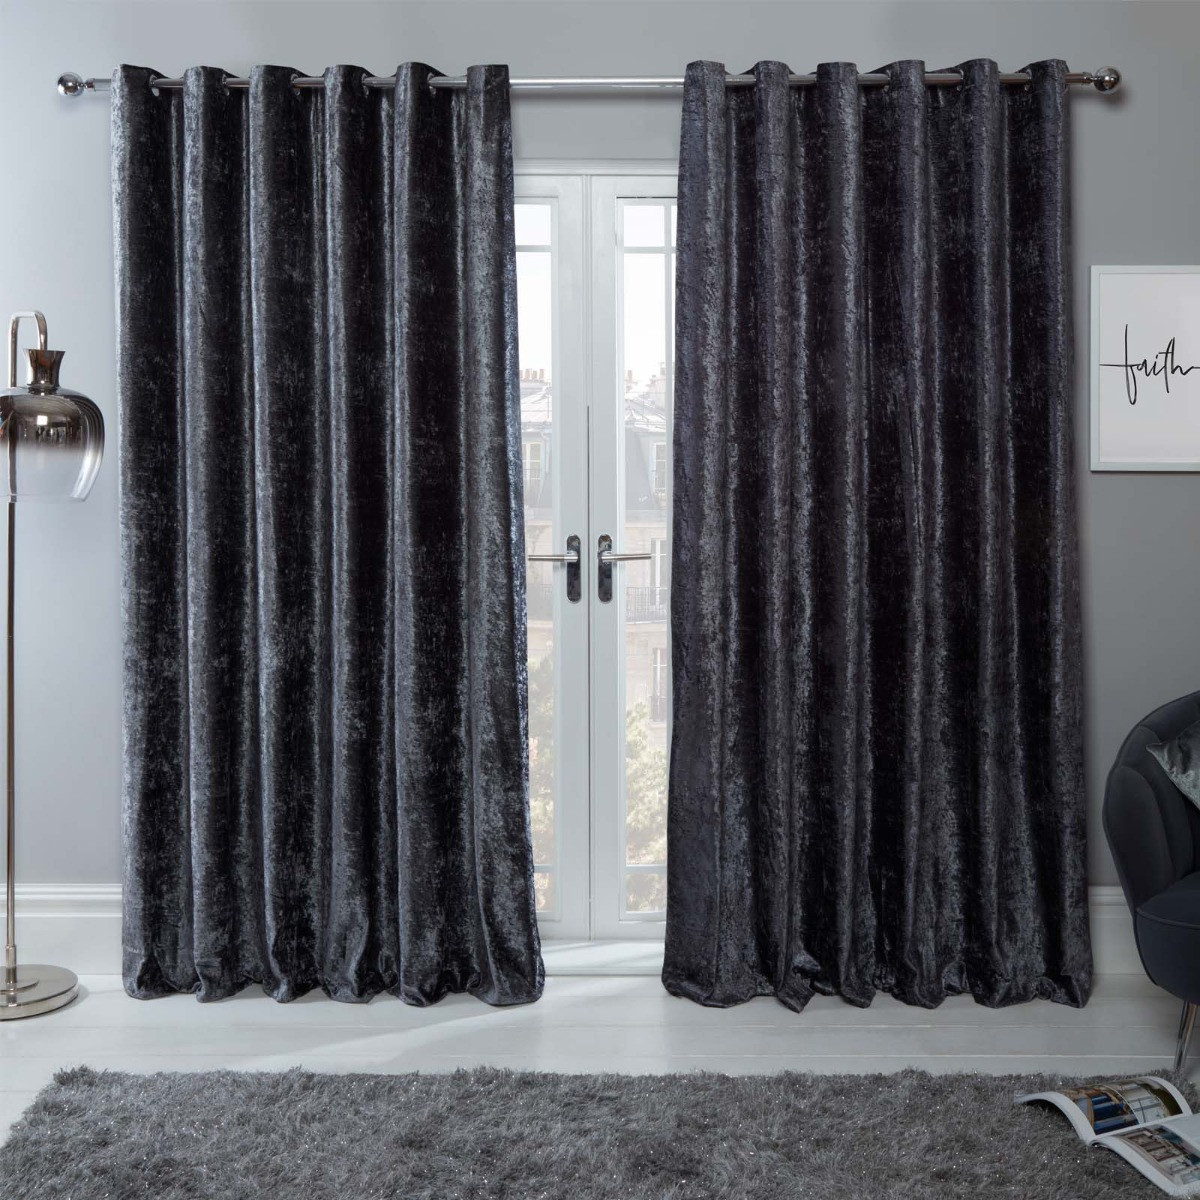 Sienna Home Crushed Velvet Eyelet Curtains - Charcoal Grey>